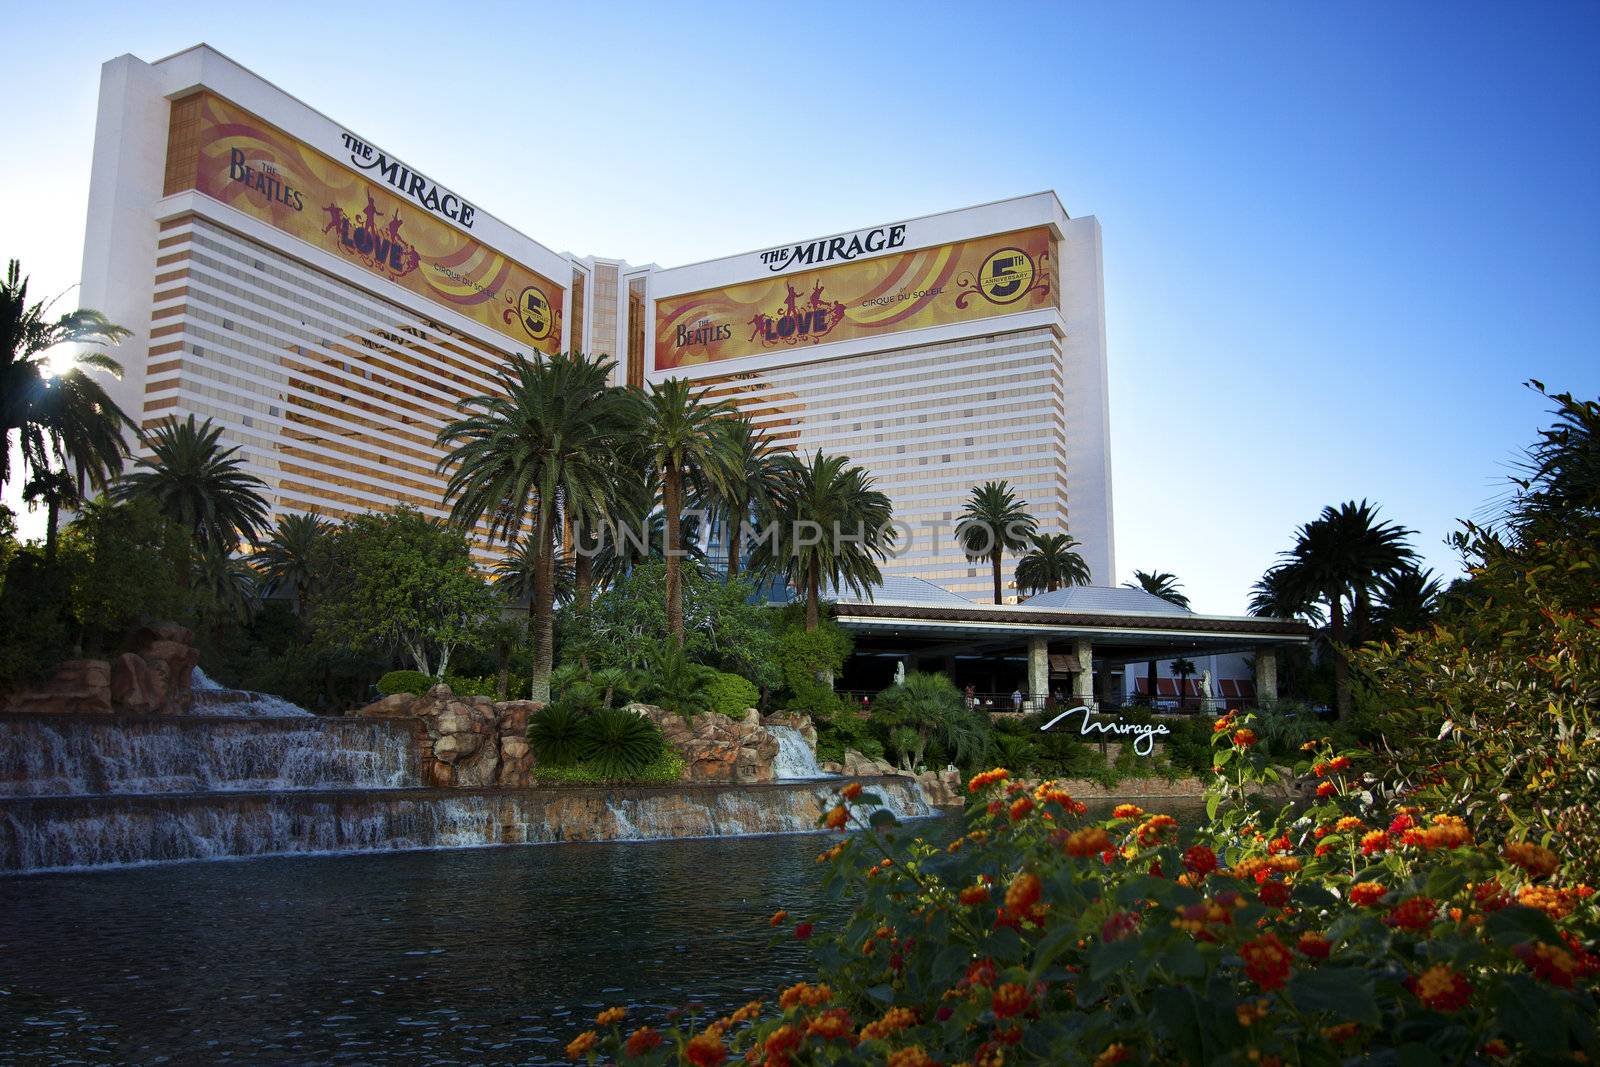 The MGM Mirage Hotel and Casino by mary981